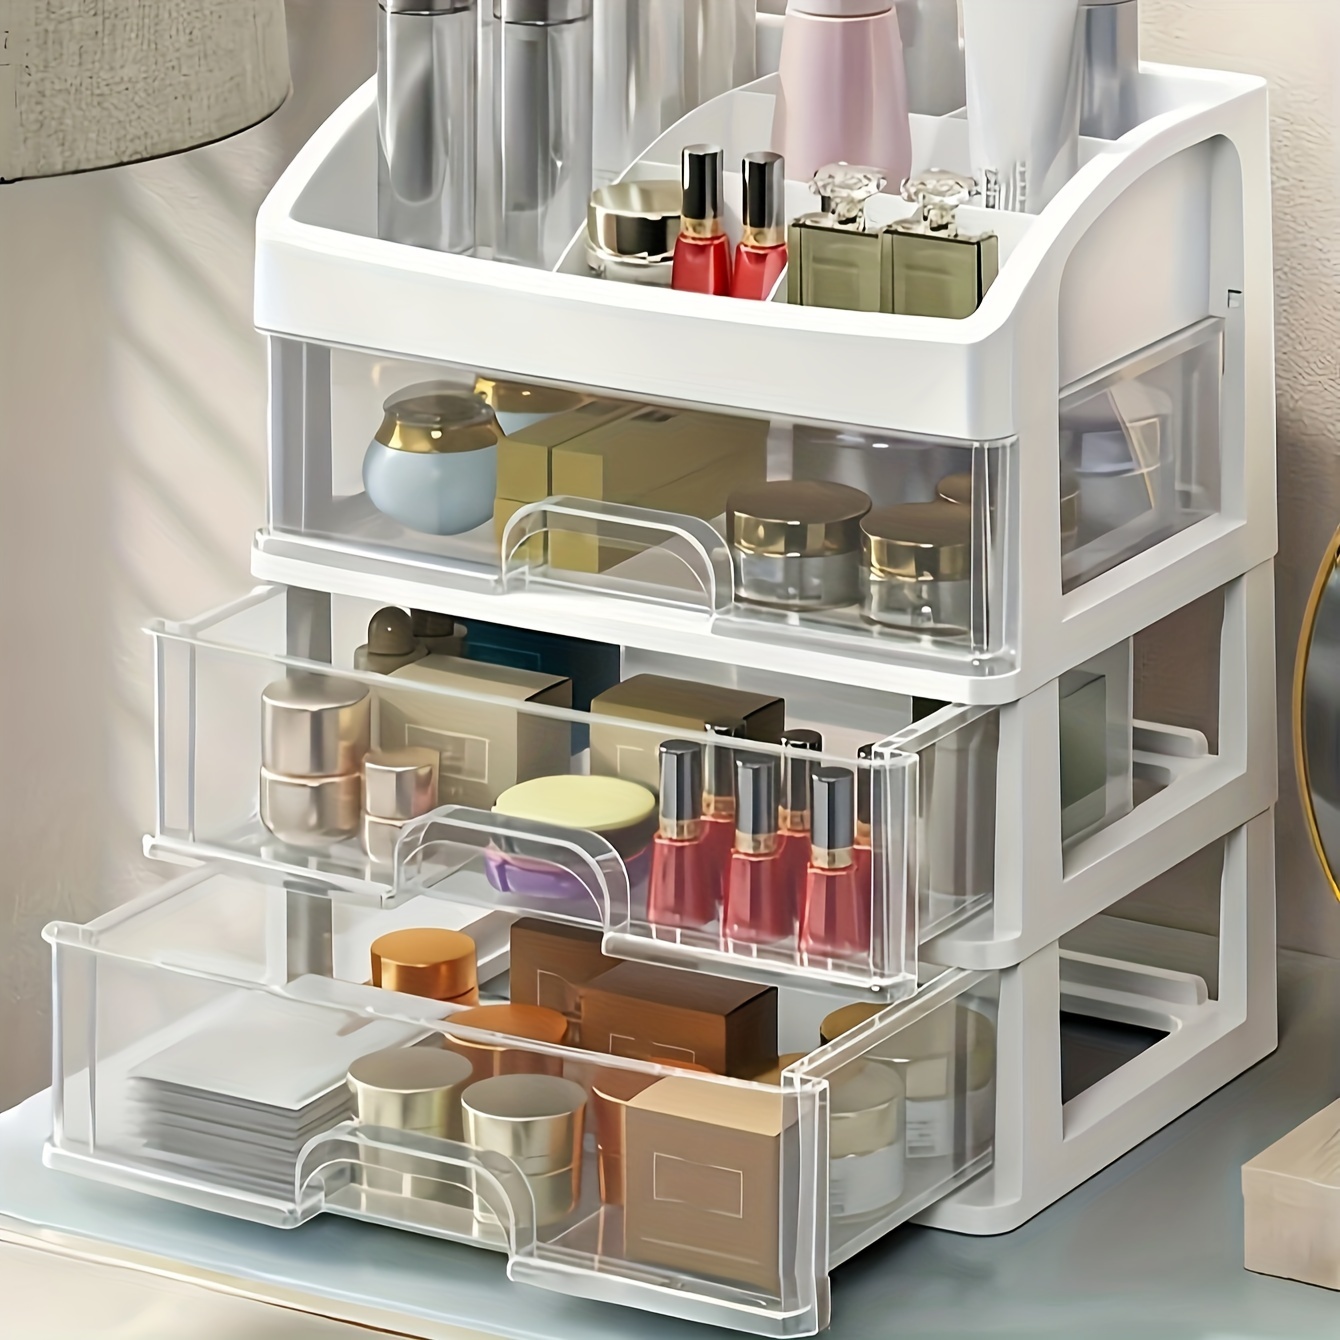 

4-tier Transparent Cosmetics Organizer: Large Capacity, Drawer Storage, Suitable For Bathrooms, Includes Shelf For Lipsticks, Nail Polishes, And Makeup Brushes